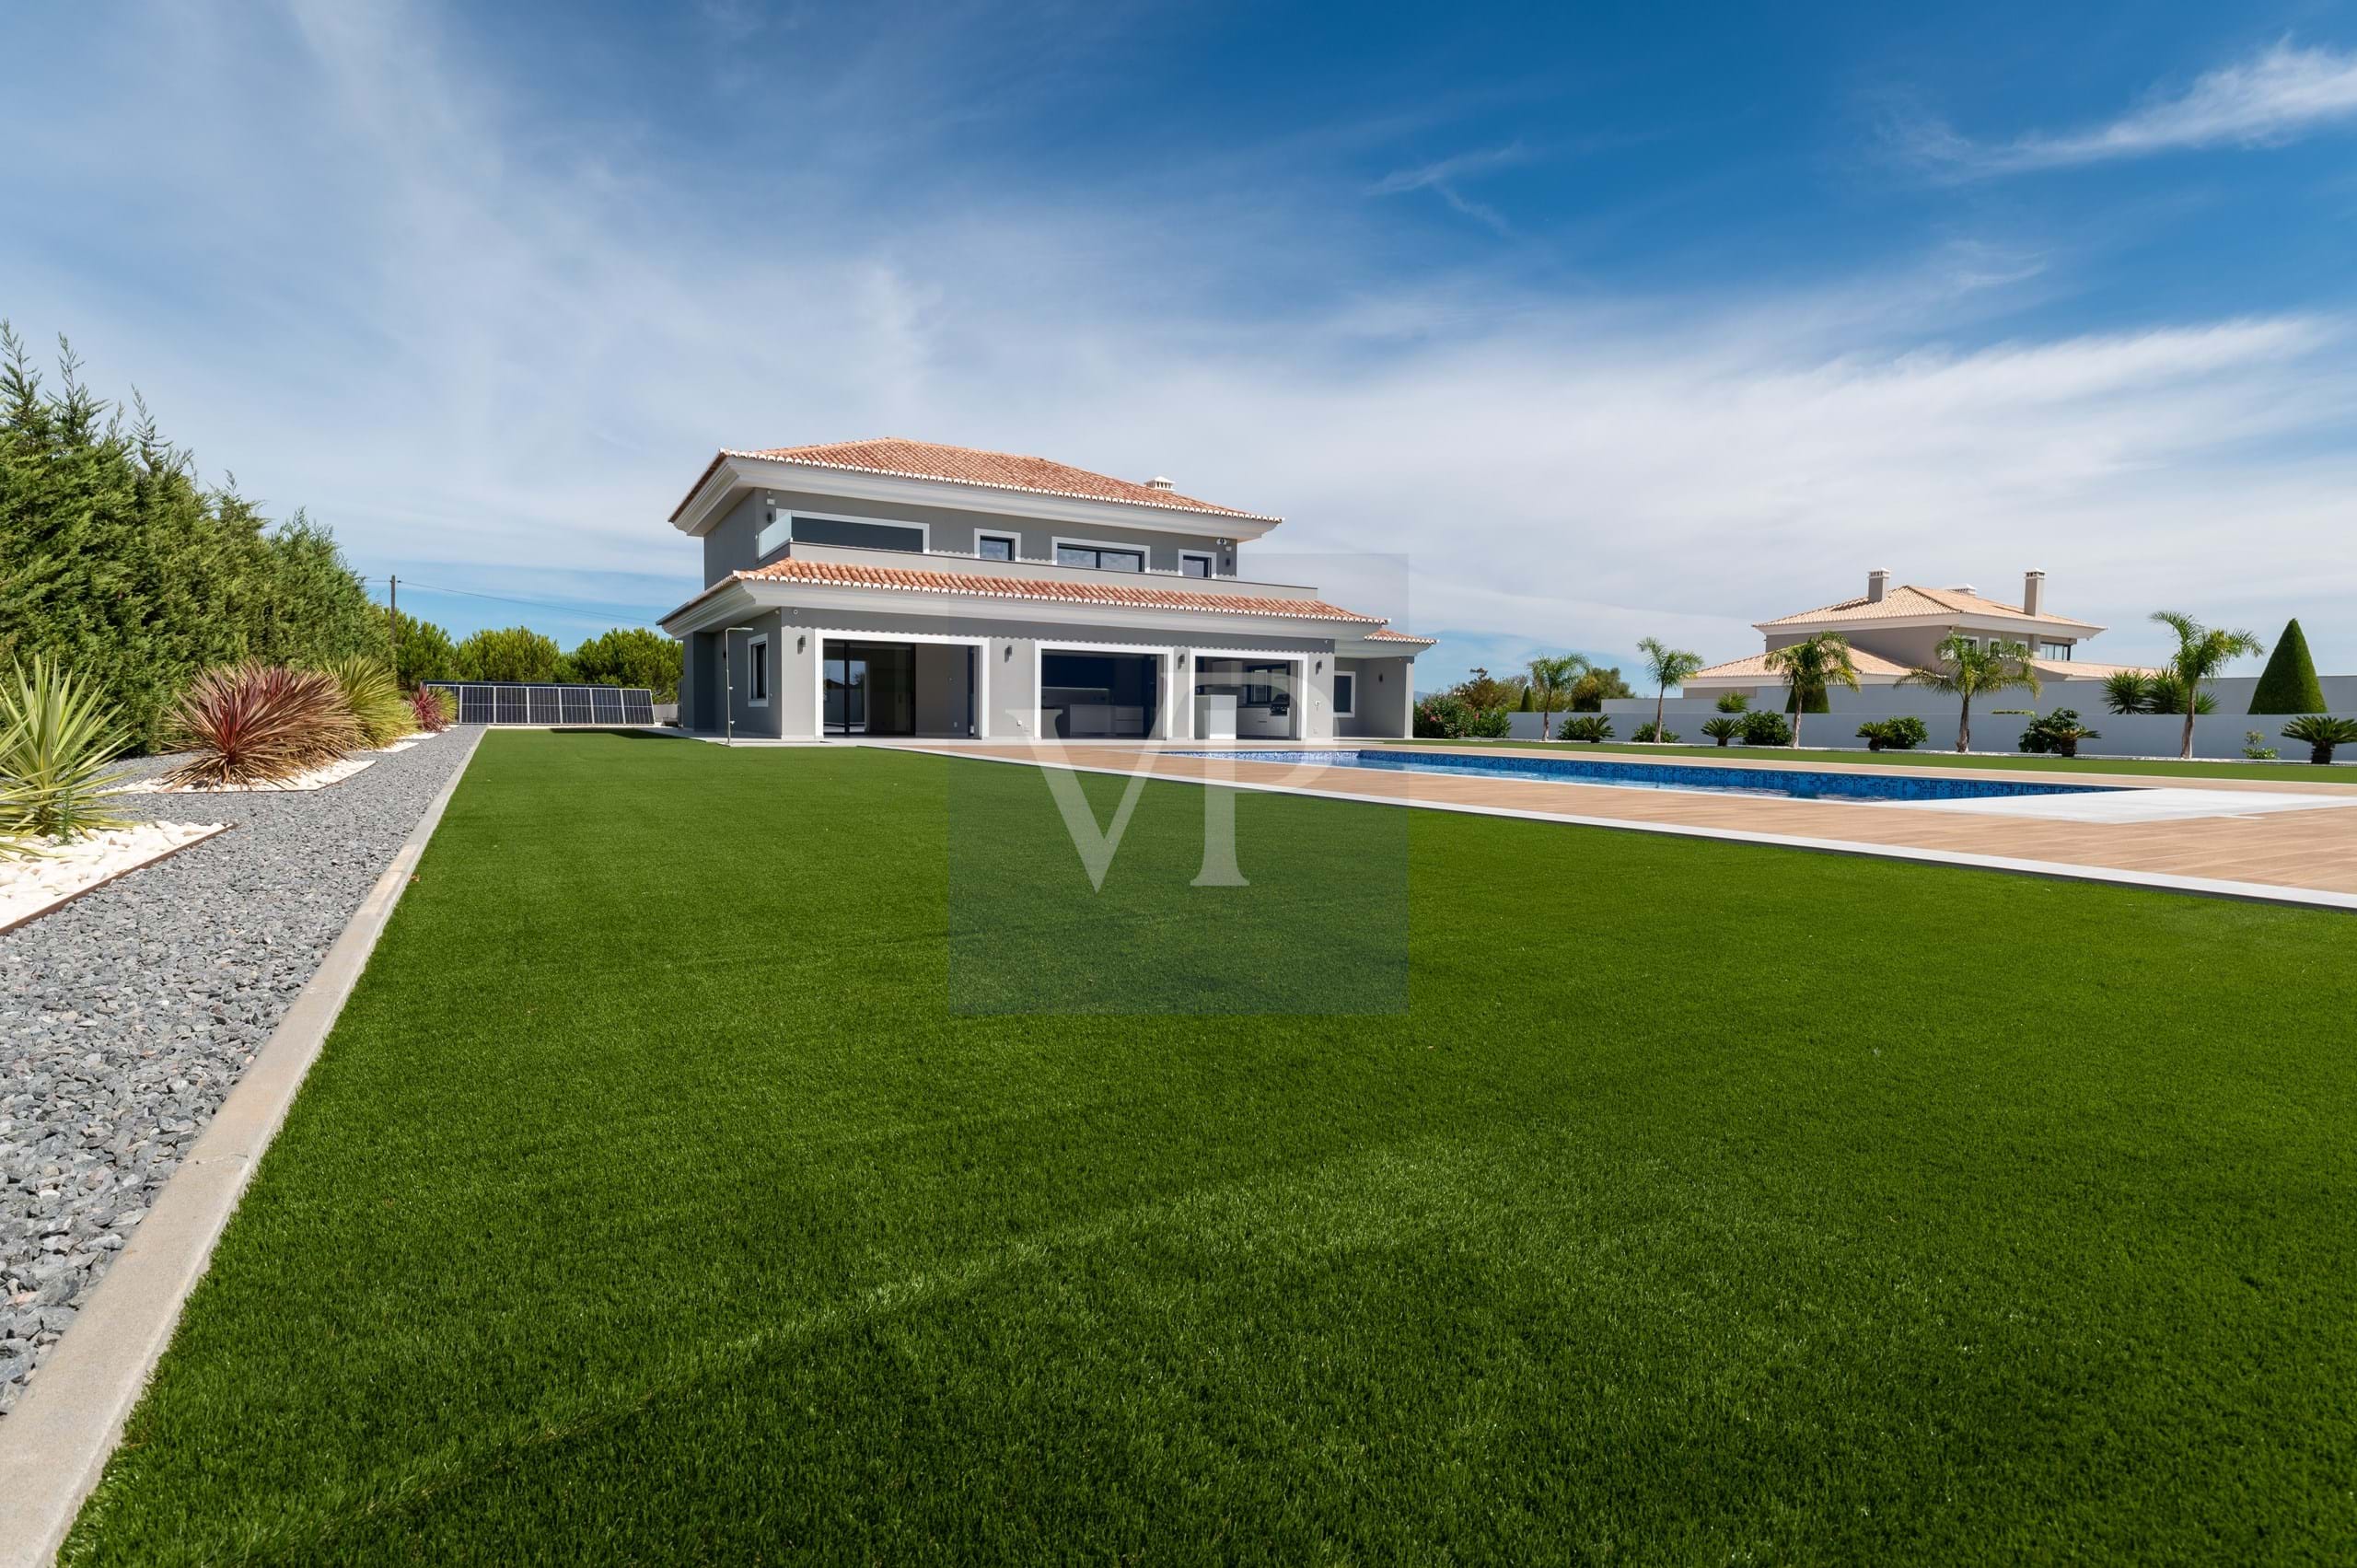 MAGNIFICENT 5 BEDROOM VILLA WITH SEAVIEW, POOL & GYM - LAGOS